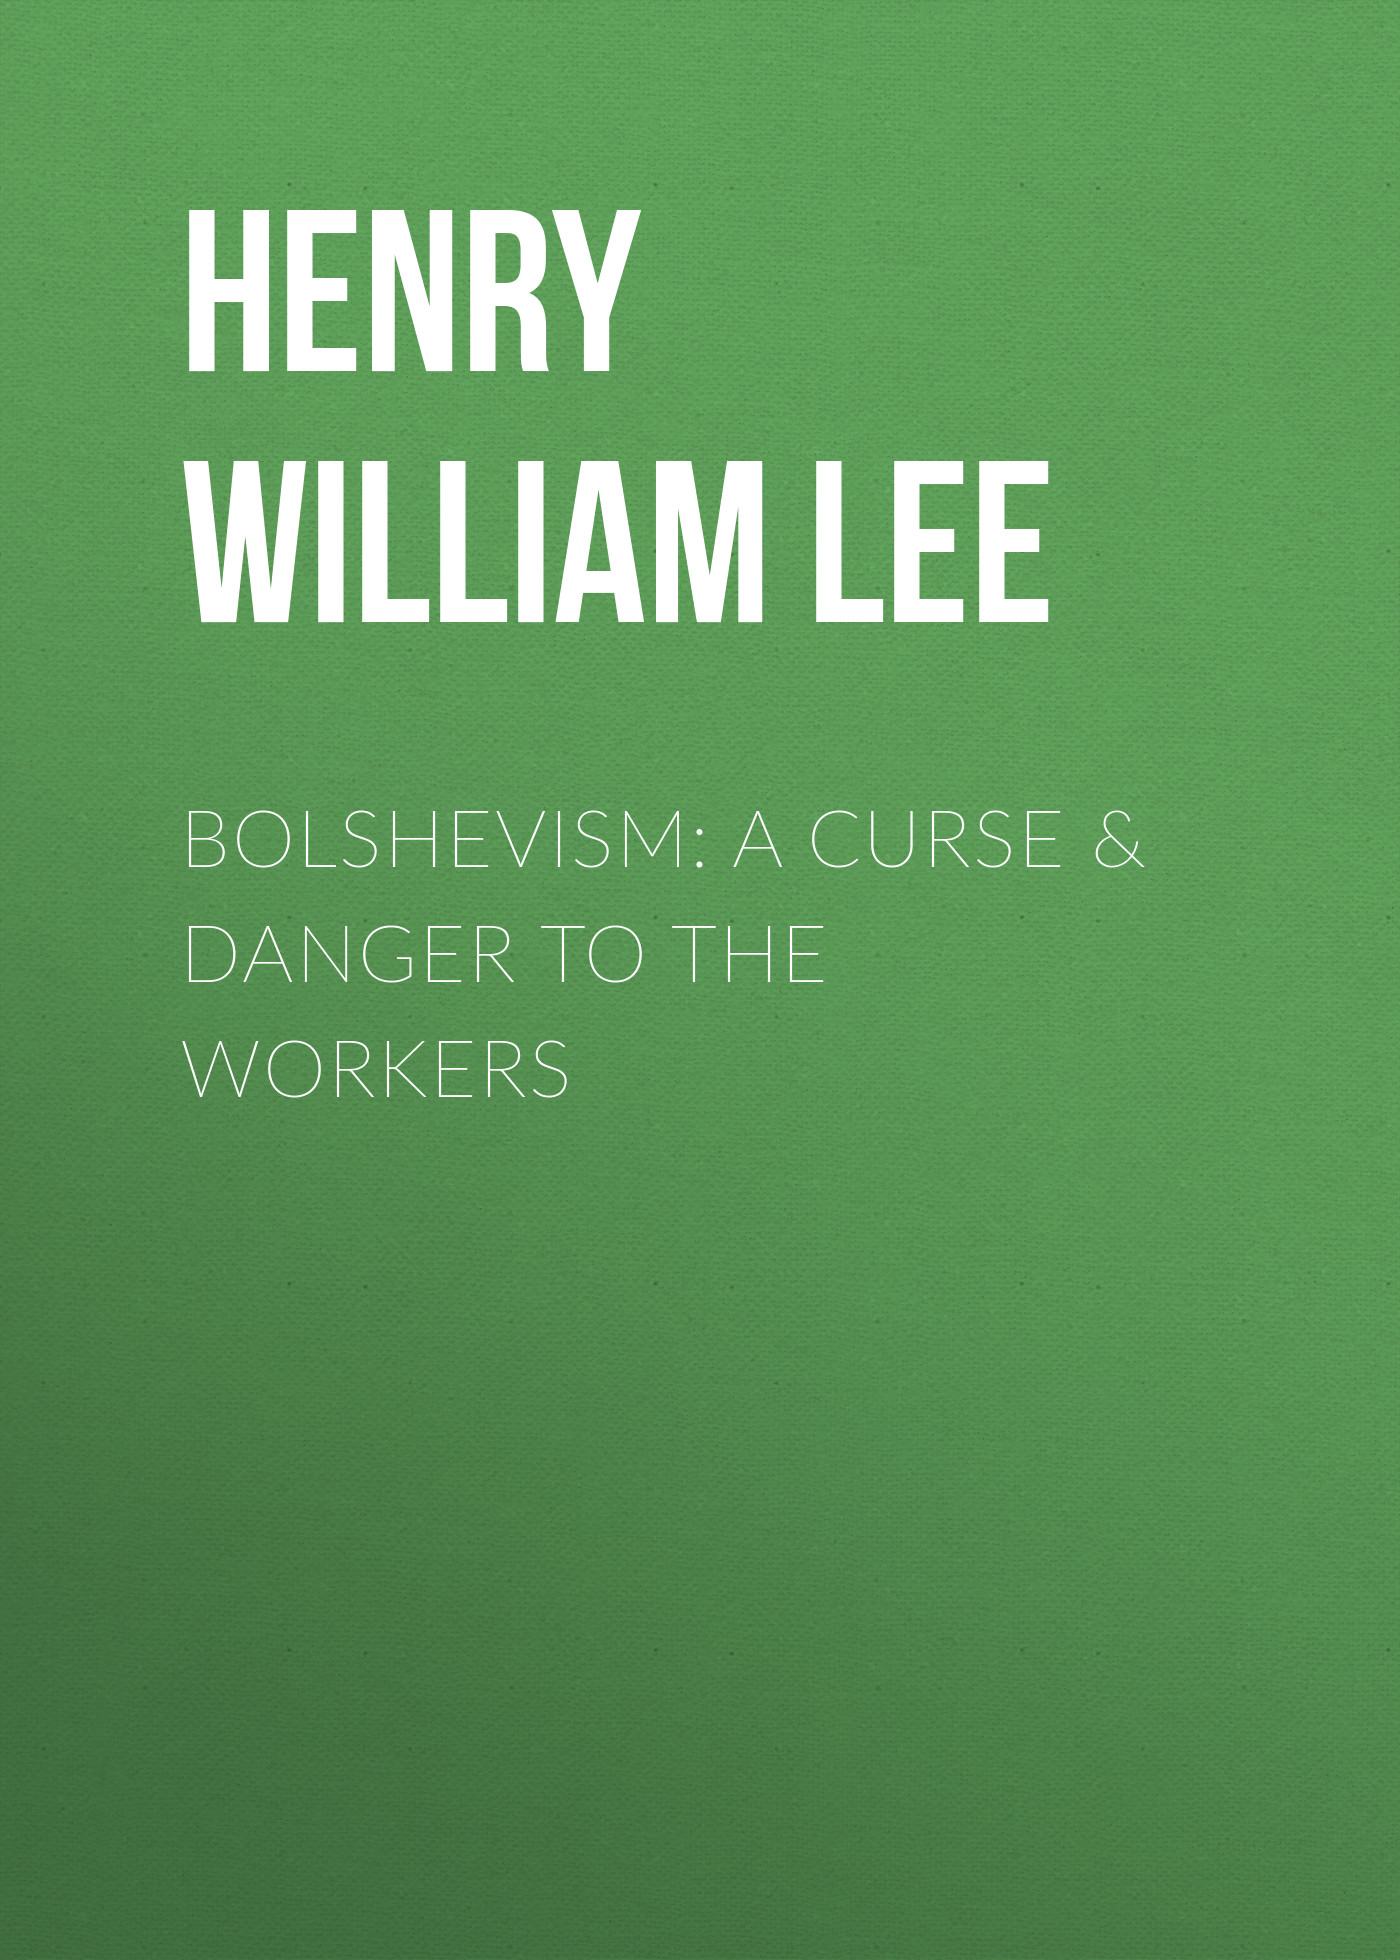 Bolshevism: A Curse&Danger to the Workers